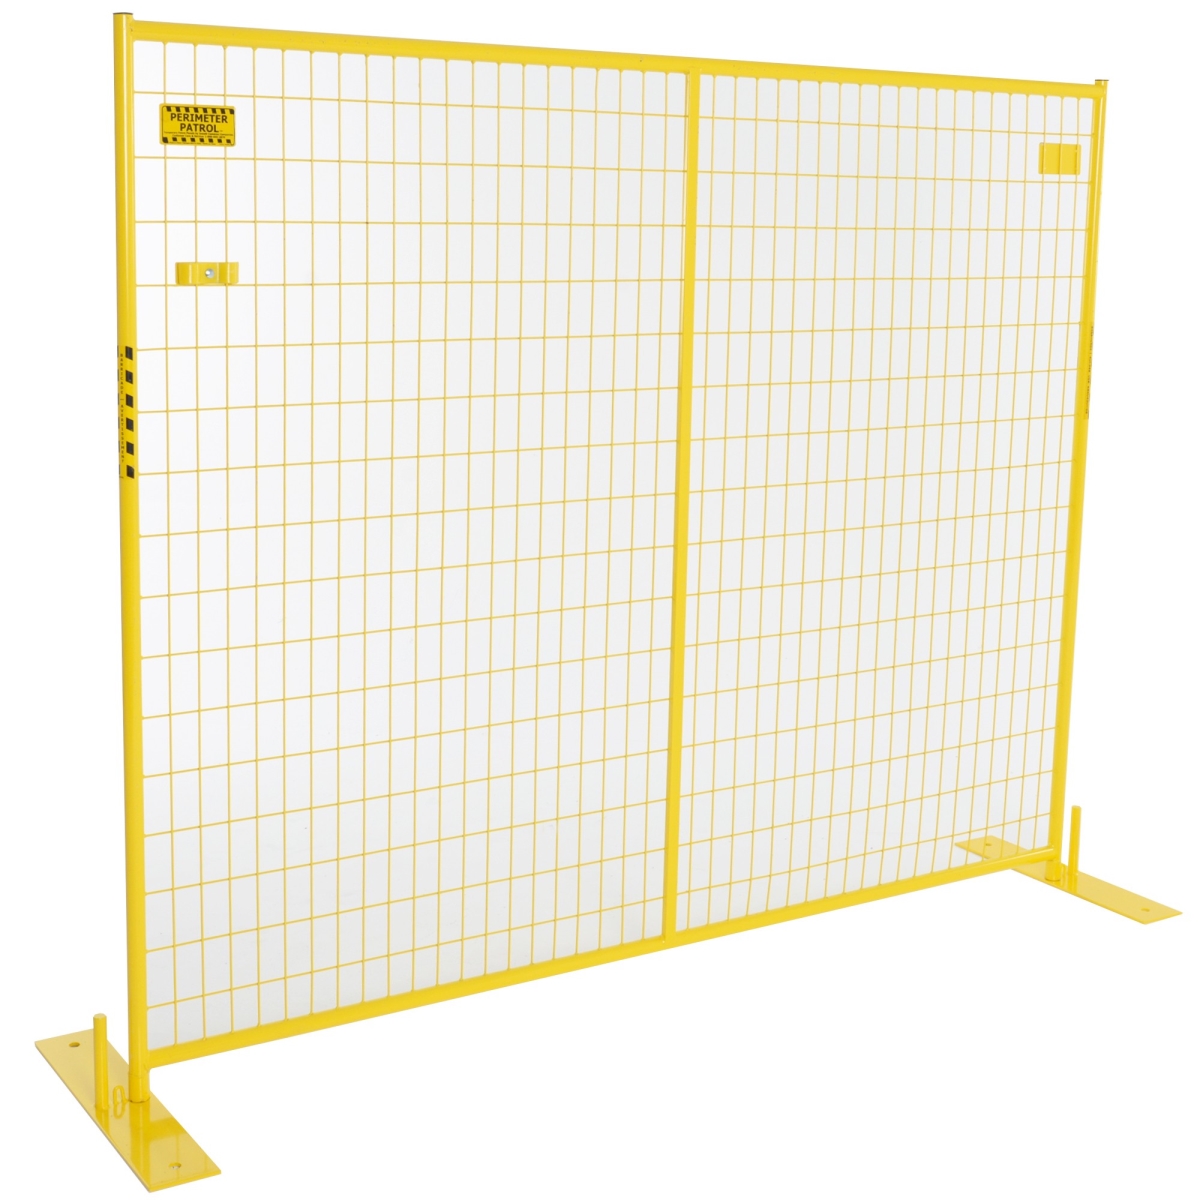 Rf 10006 Perimeter Patrol Portable Security Panel With Clamp, Yellow - 7 Ft. 6 In. X 6 Ft.